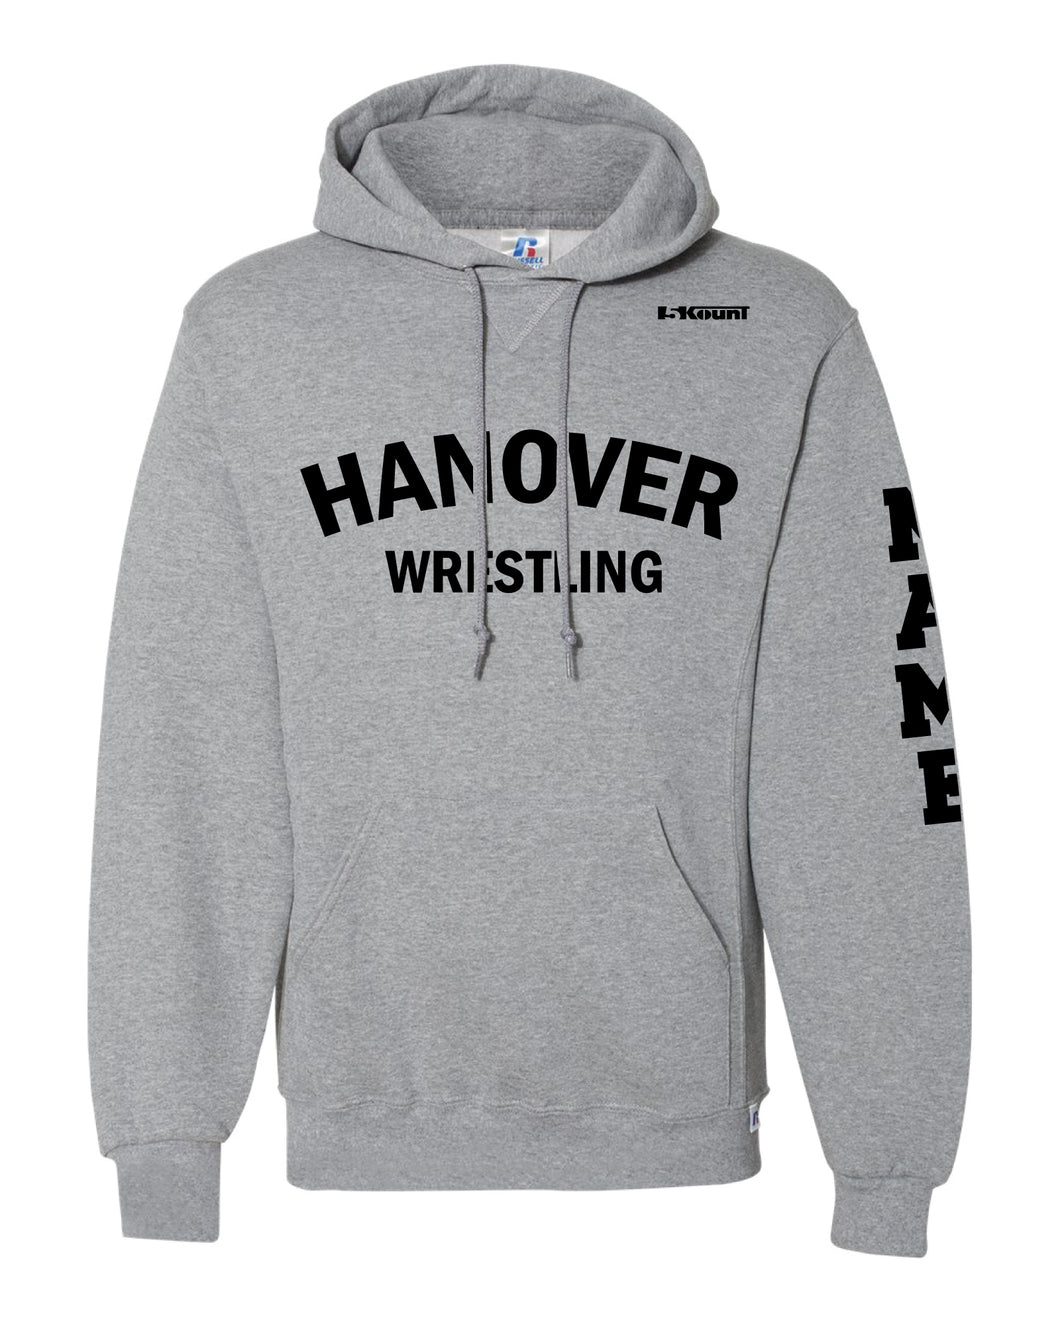 Hanover Township Wrestling Russell Athletic Cotton Hoodie - Grey - 5KounT2018